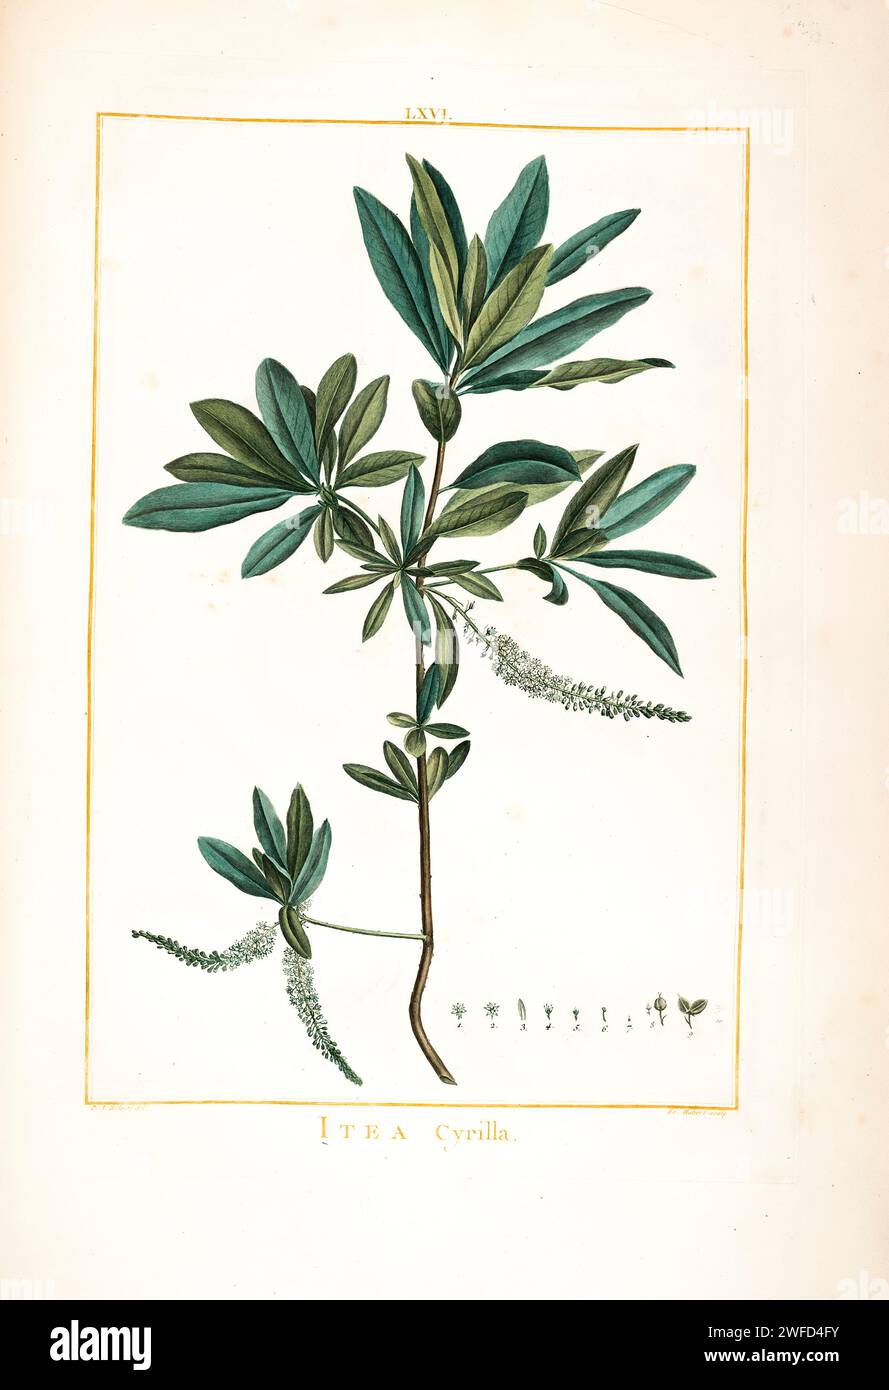 Itea cyrilla syn Cyrilla racemiflora Hand Painted by Pierre-Joseph Redouté and published in Stirpes Novae aut Minus Cognitae (1784) by Charles Louis L'Héritier de Brutelle. Cyrilla racemiflora, the sole species in the genus Cyrilla, is a flowering plant in the family Cyrillaceae, native to warm temperate to tropical regions of the Americas, from the southeastern United States south through the Caribbean, Mexico (Oaxaca only) and Central America to northern Brazil and Venezuela in South America. Common names include swamp cyrilla, swamp titi, palo colorado, red titi, black titi, white titi, lea Stock Photo